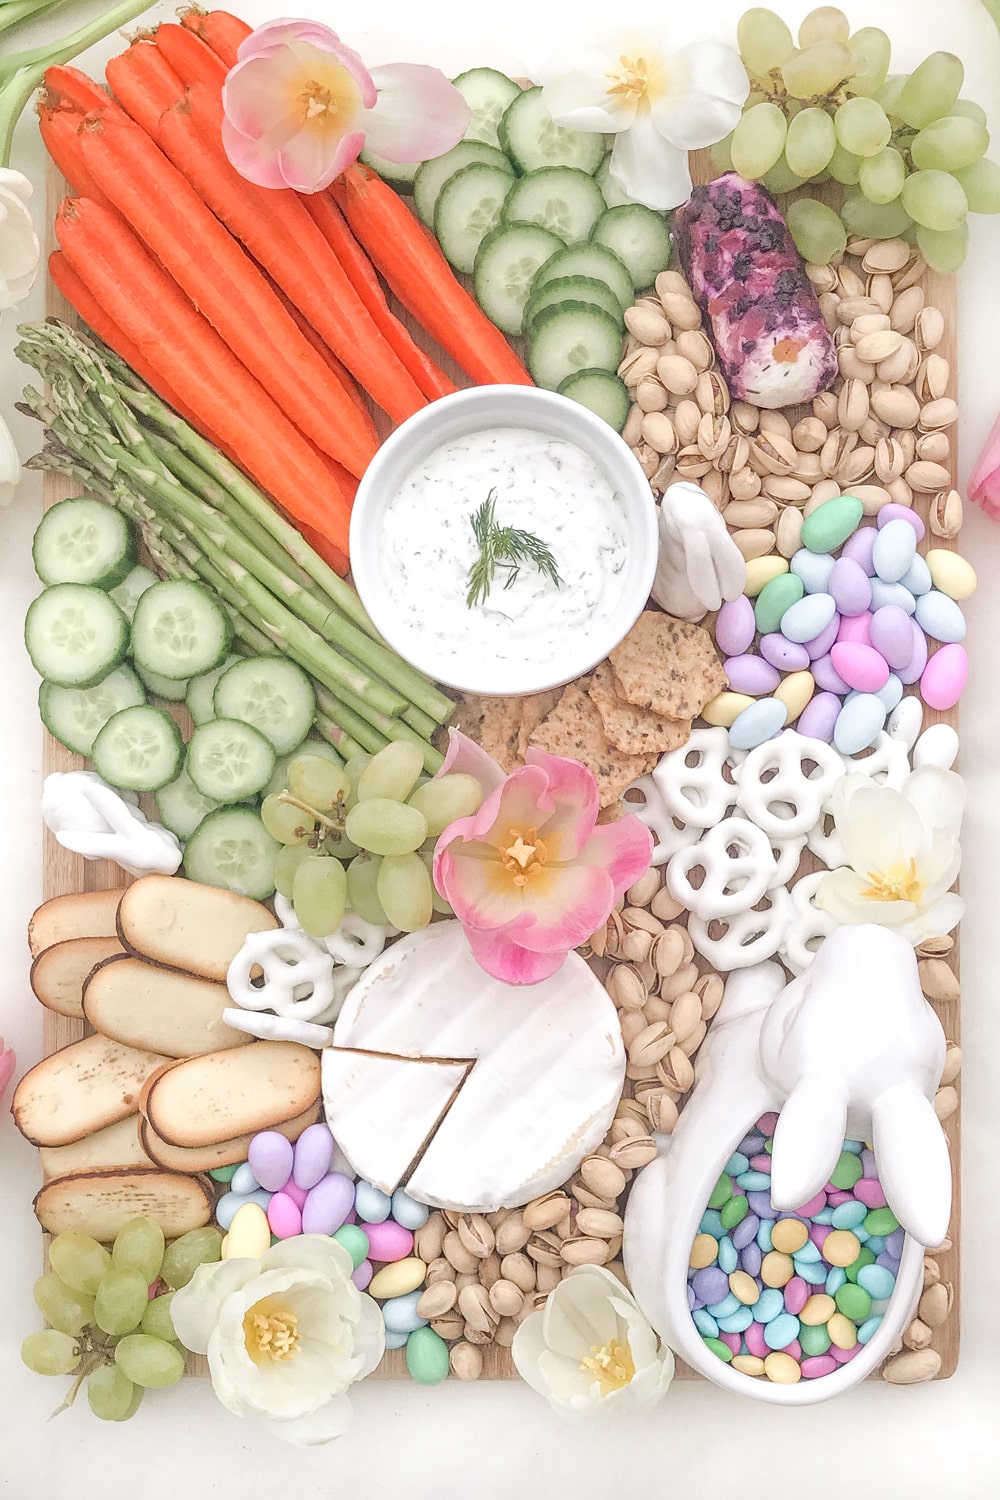 Easy Easter lunch ideas from blogger Stephanie Ziajka on Diary of a Debutante